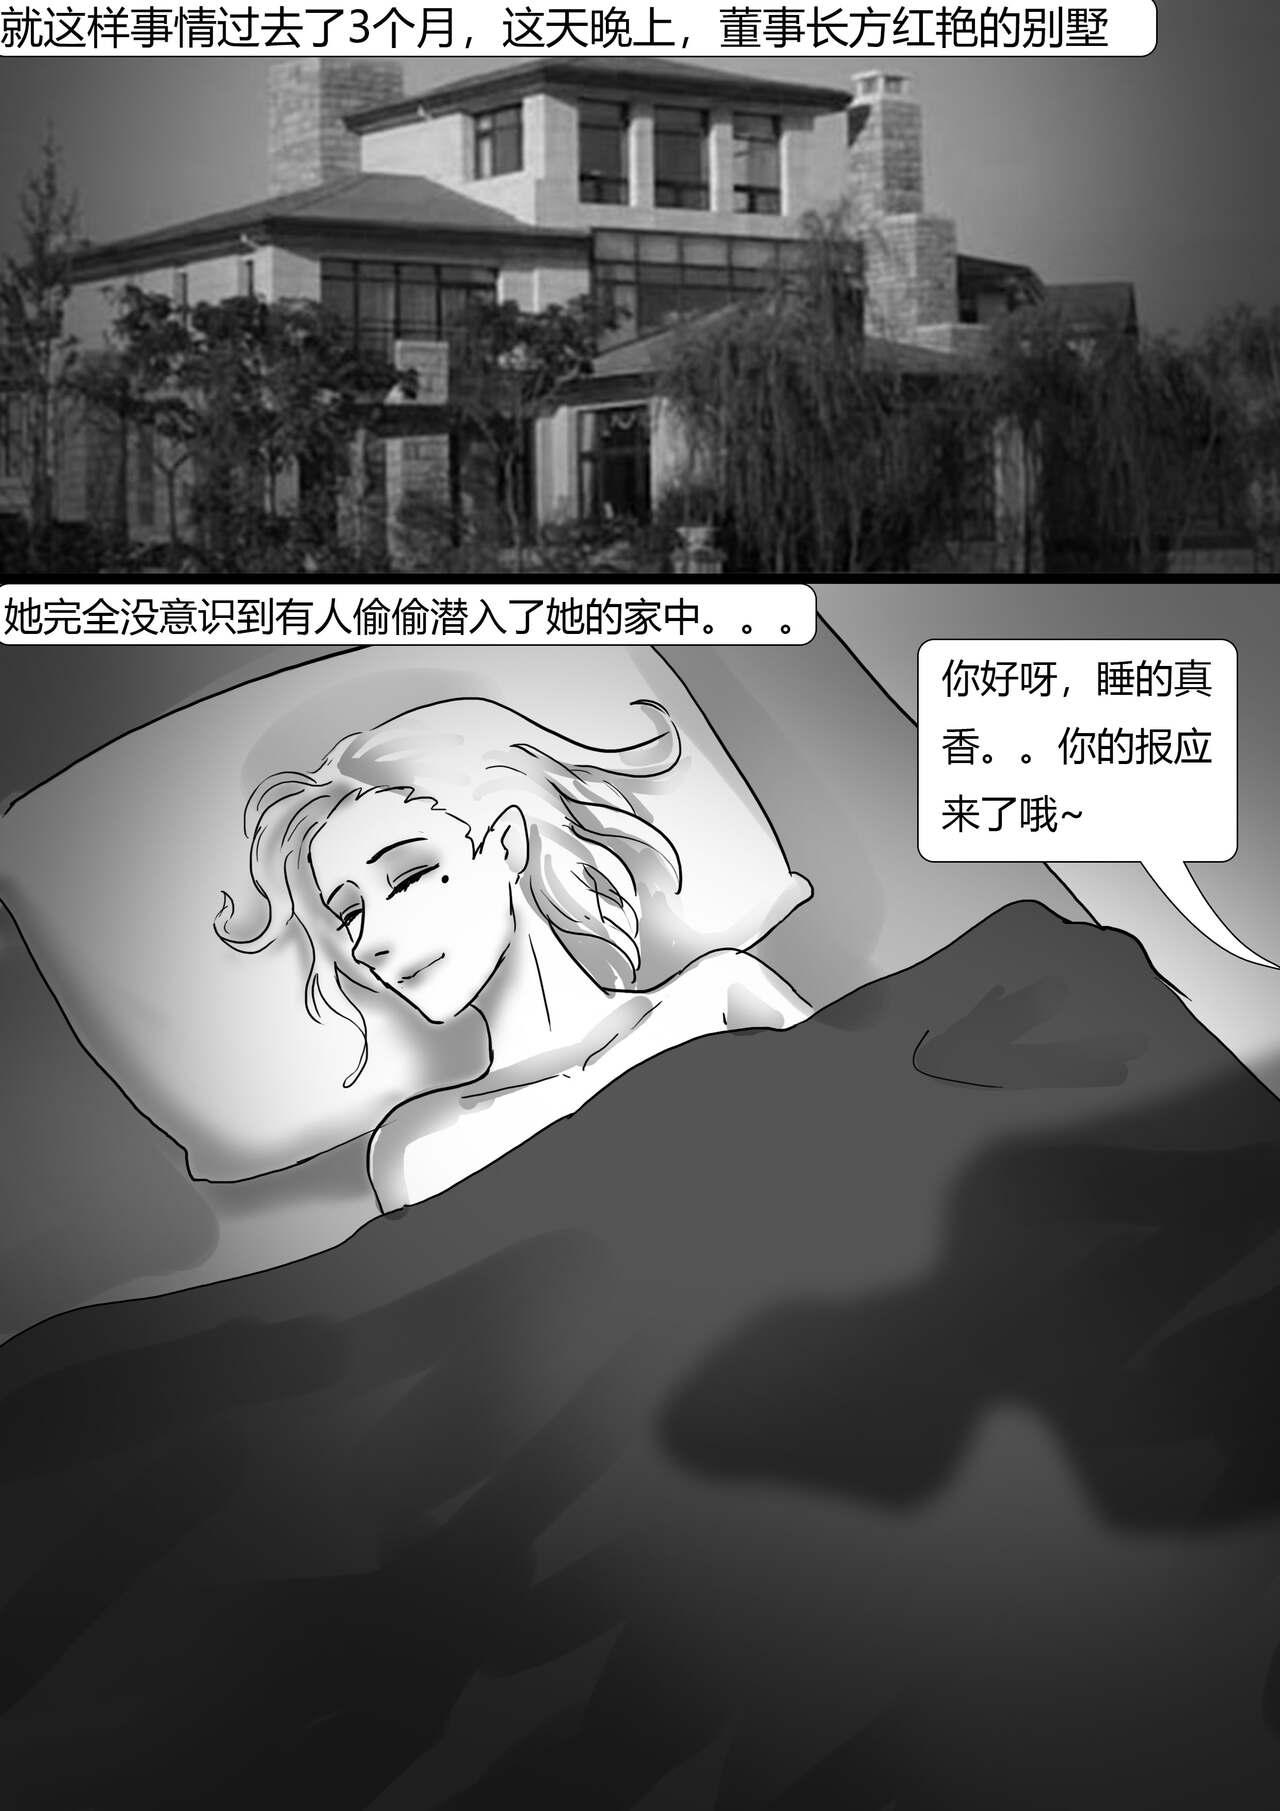 Masseuse 生死时速 Time Chacing Reversecowgirl - Page 4